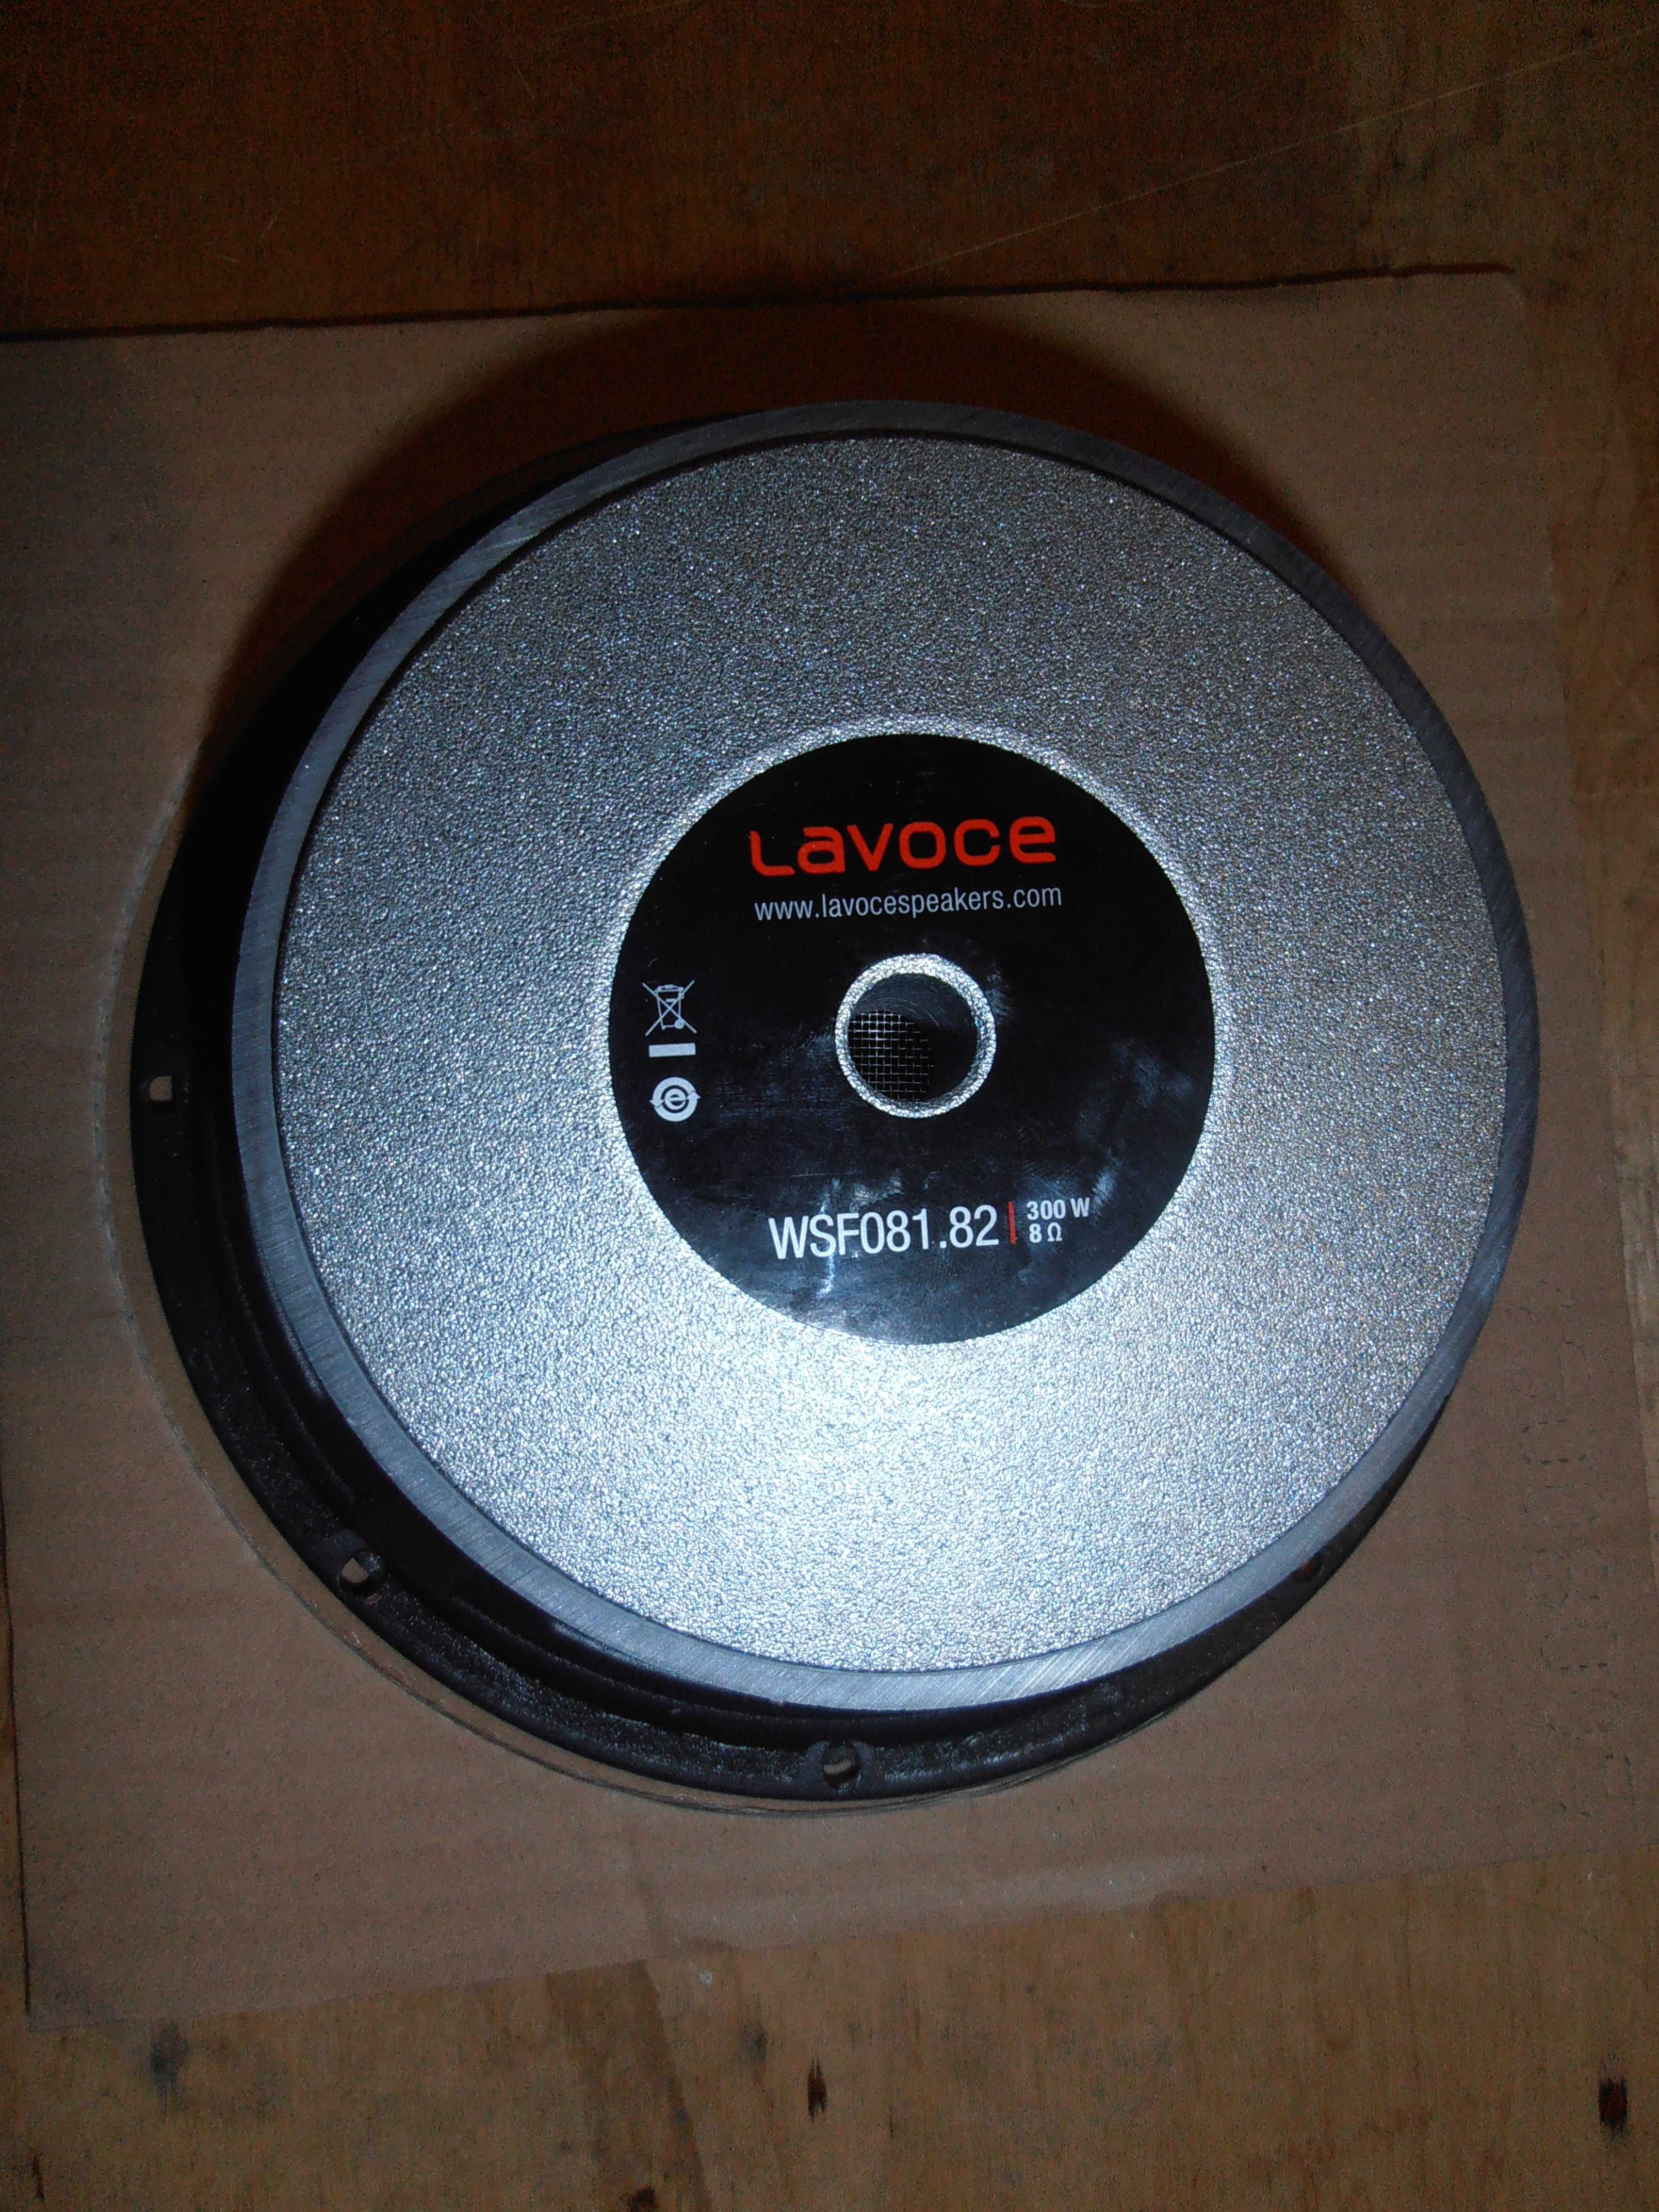 LaVoce WSF081.82